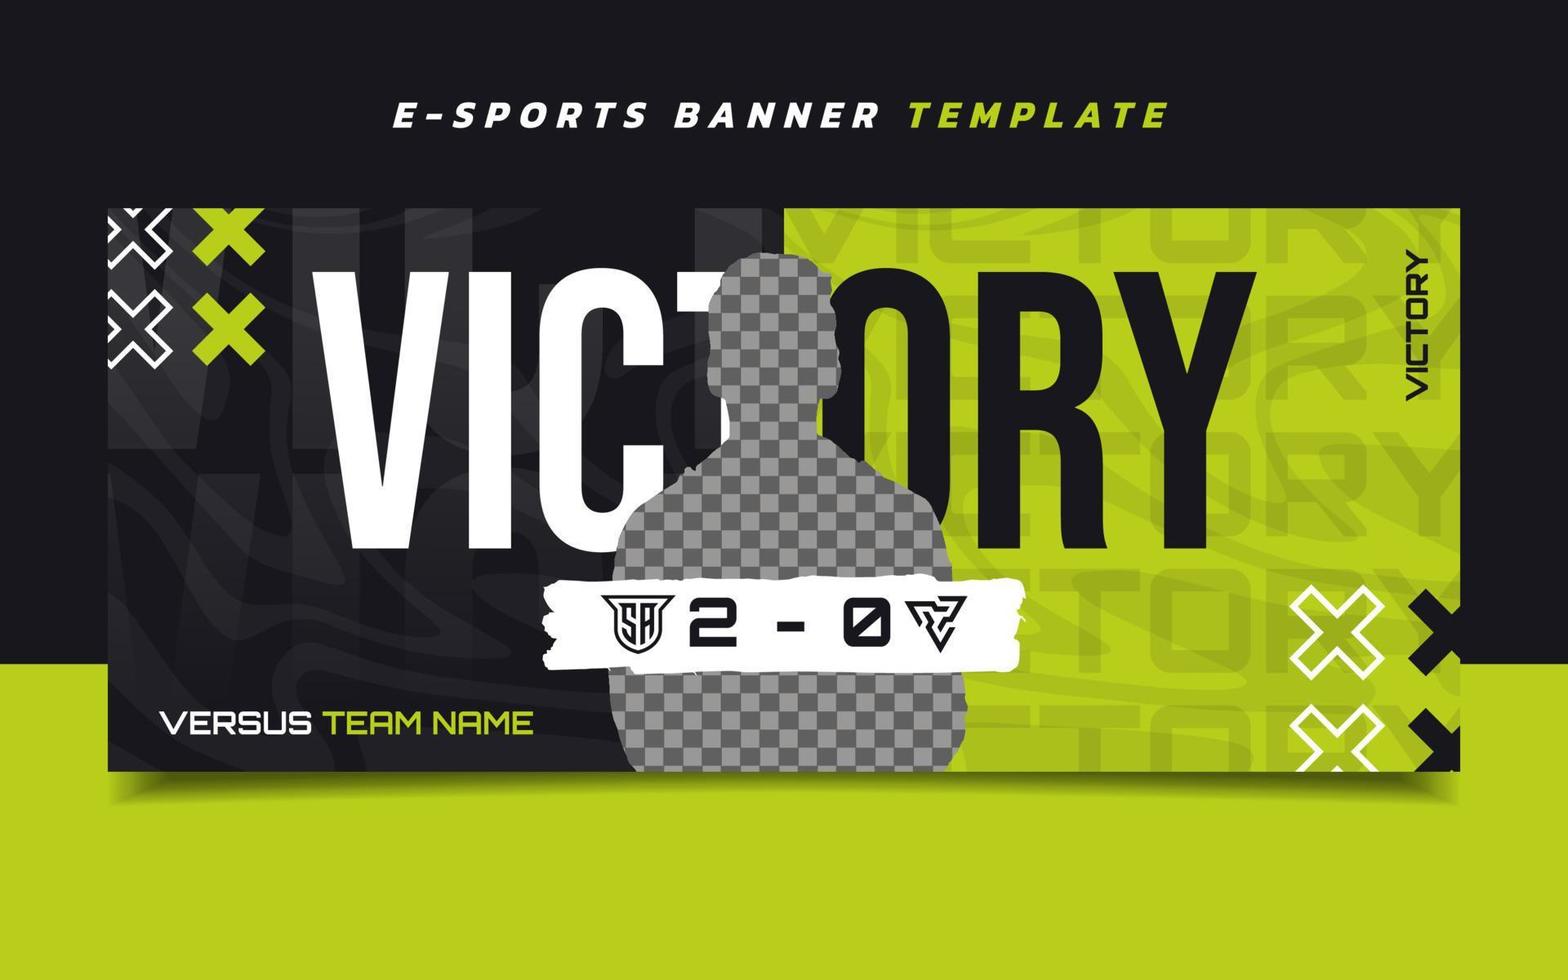 Versus E-Sports Gaming Banner Template with Logo for Social Media vector